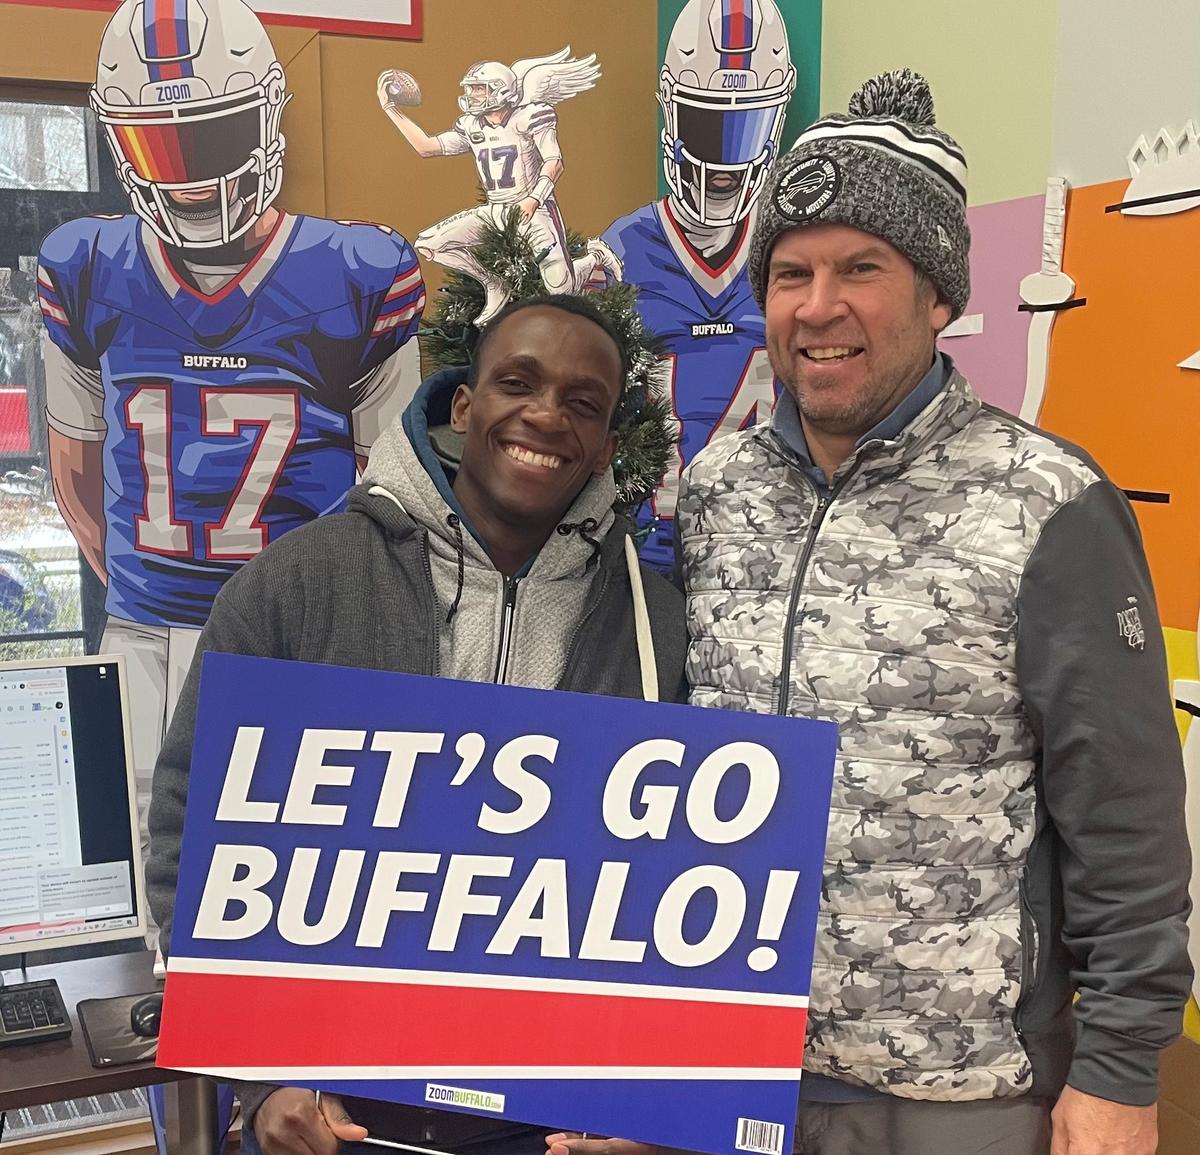 Mr. Mlondani with Mr. Allen after receiving the GoFundMe donations raised to help replace his family’s car. "The words 'Let’s go Buffalo' has new meaning to the Mlondani family," Mr. Allen said. (Courtesy of Rory Allen)